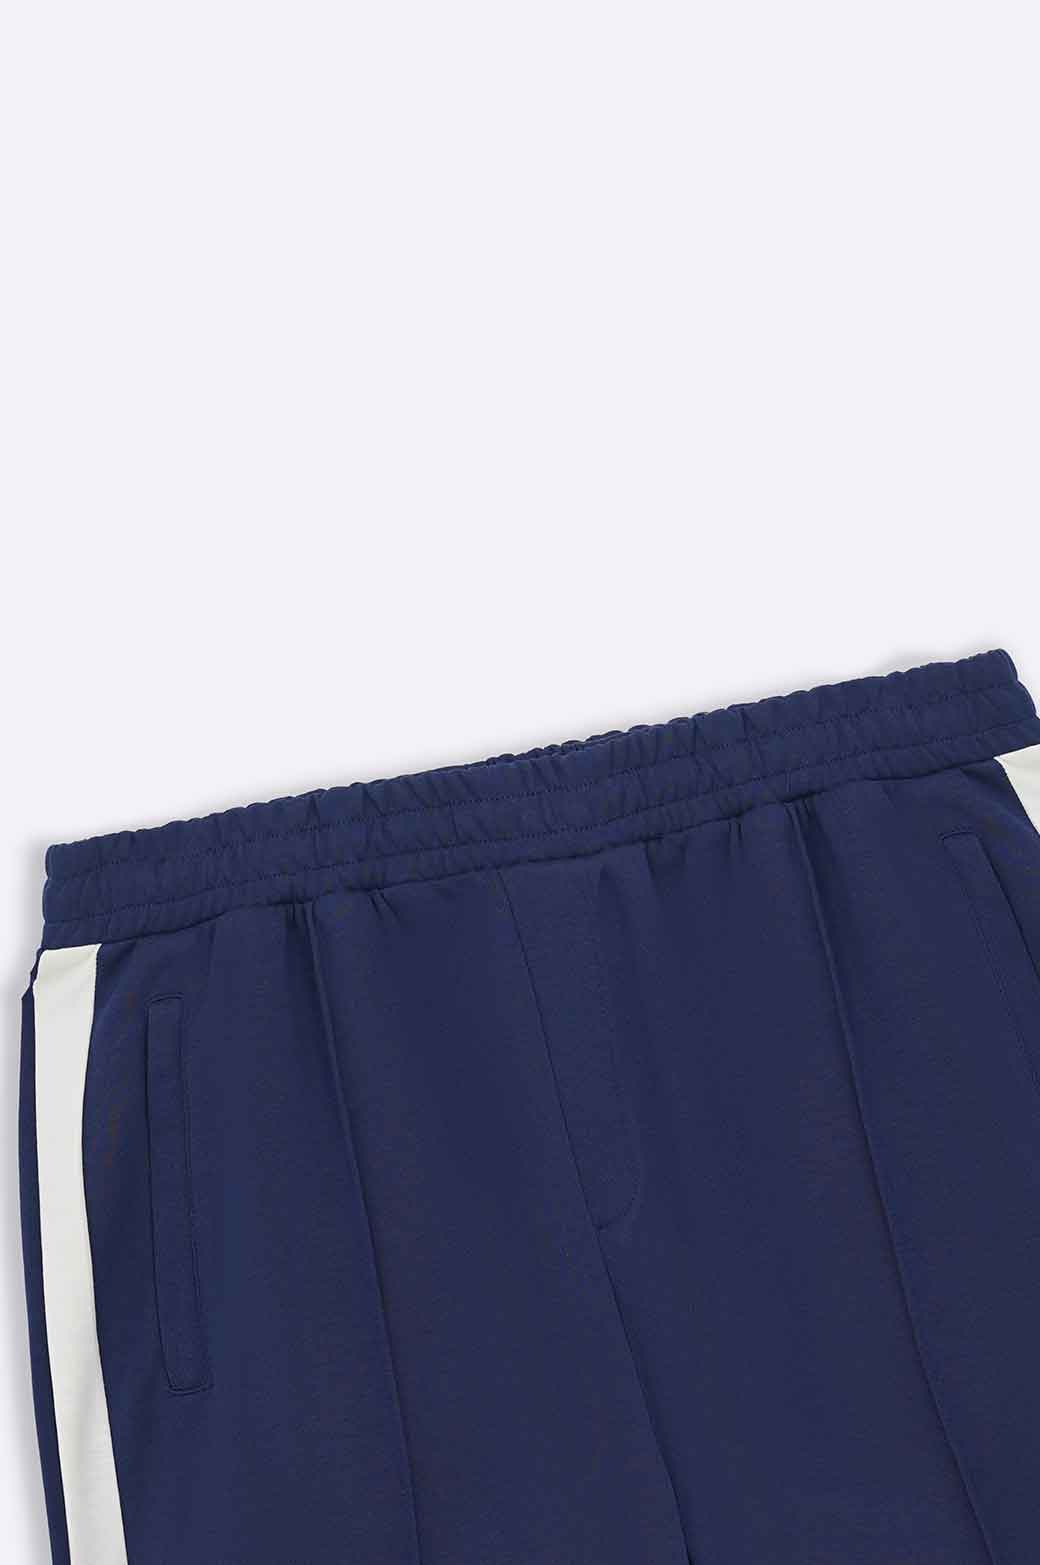 NAVY SHORTS WITH SIDE PANEL